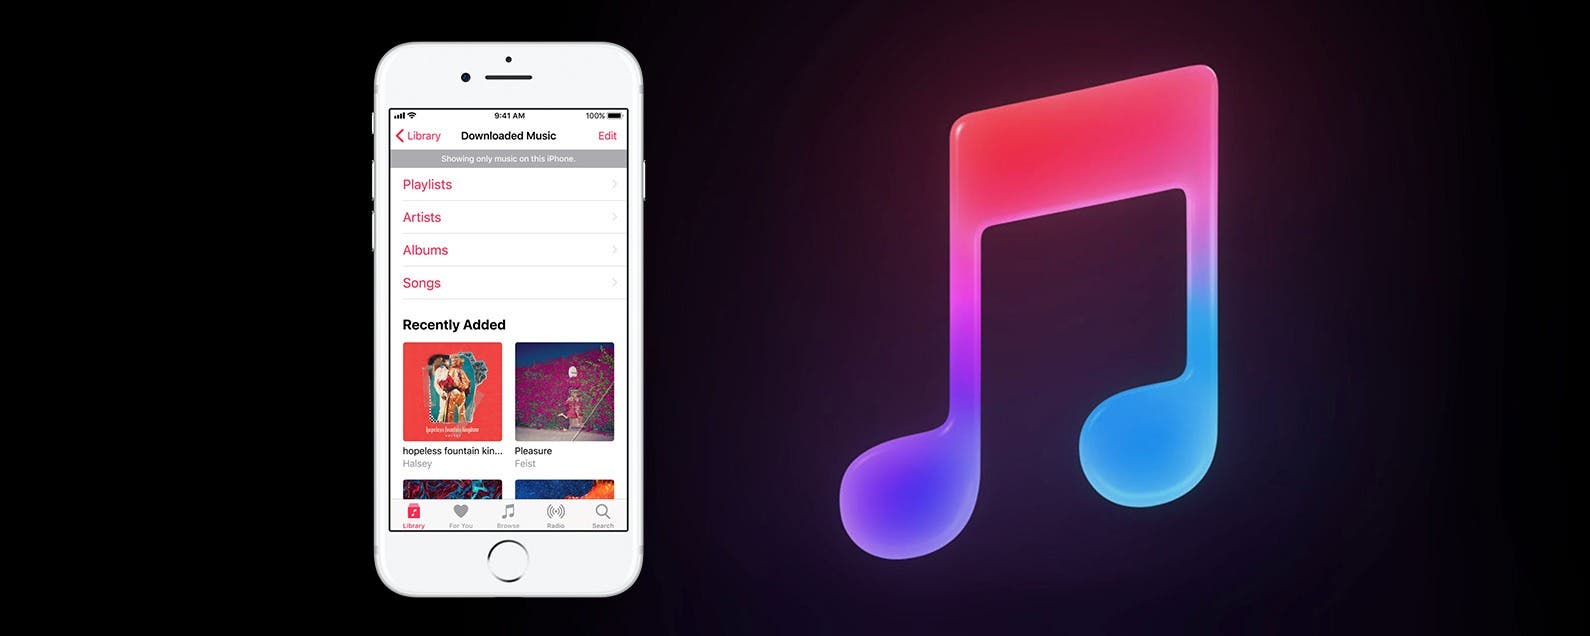 How To Find Download Music From Apple Music On Iphone